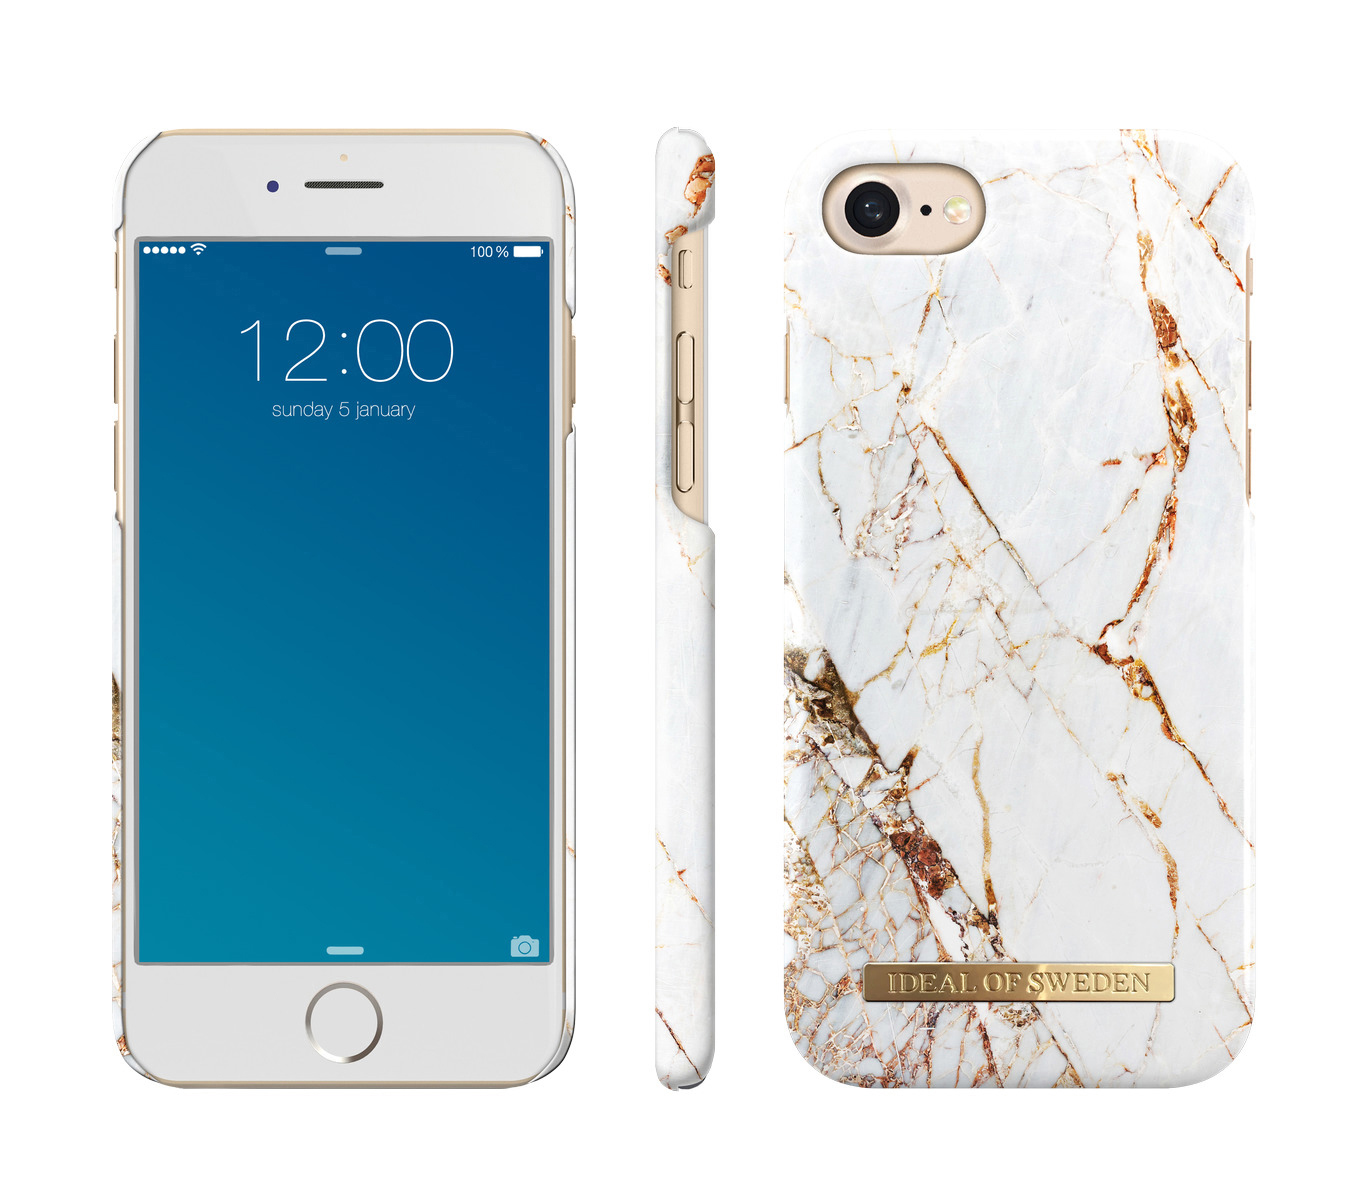 OF IDEAL iPhone Backcover, Gold SWEDEN 8, 6, Apple, iPhone Carrara 7, Fashion, iPhone